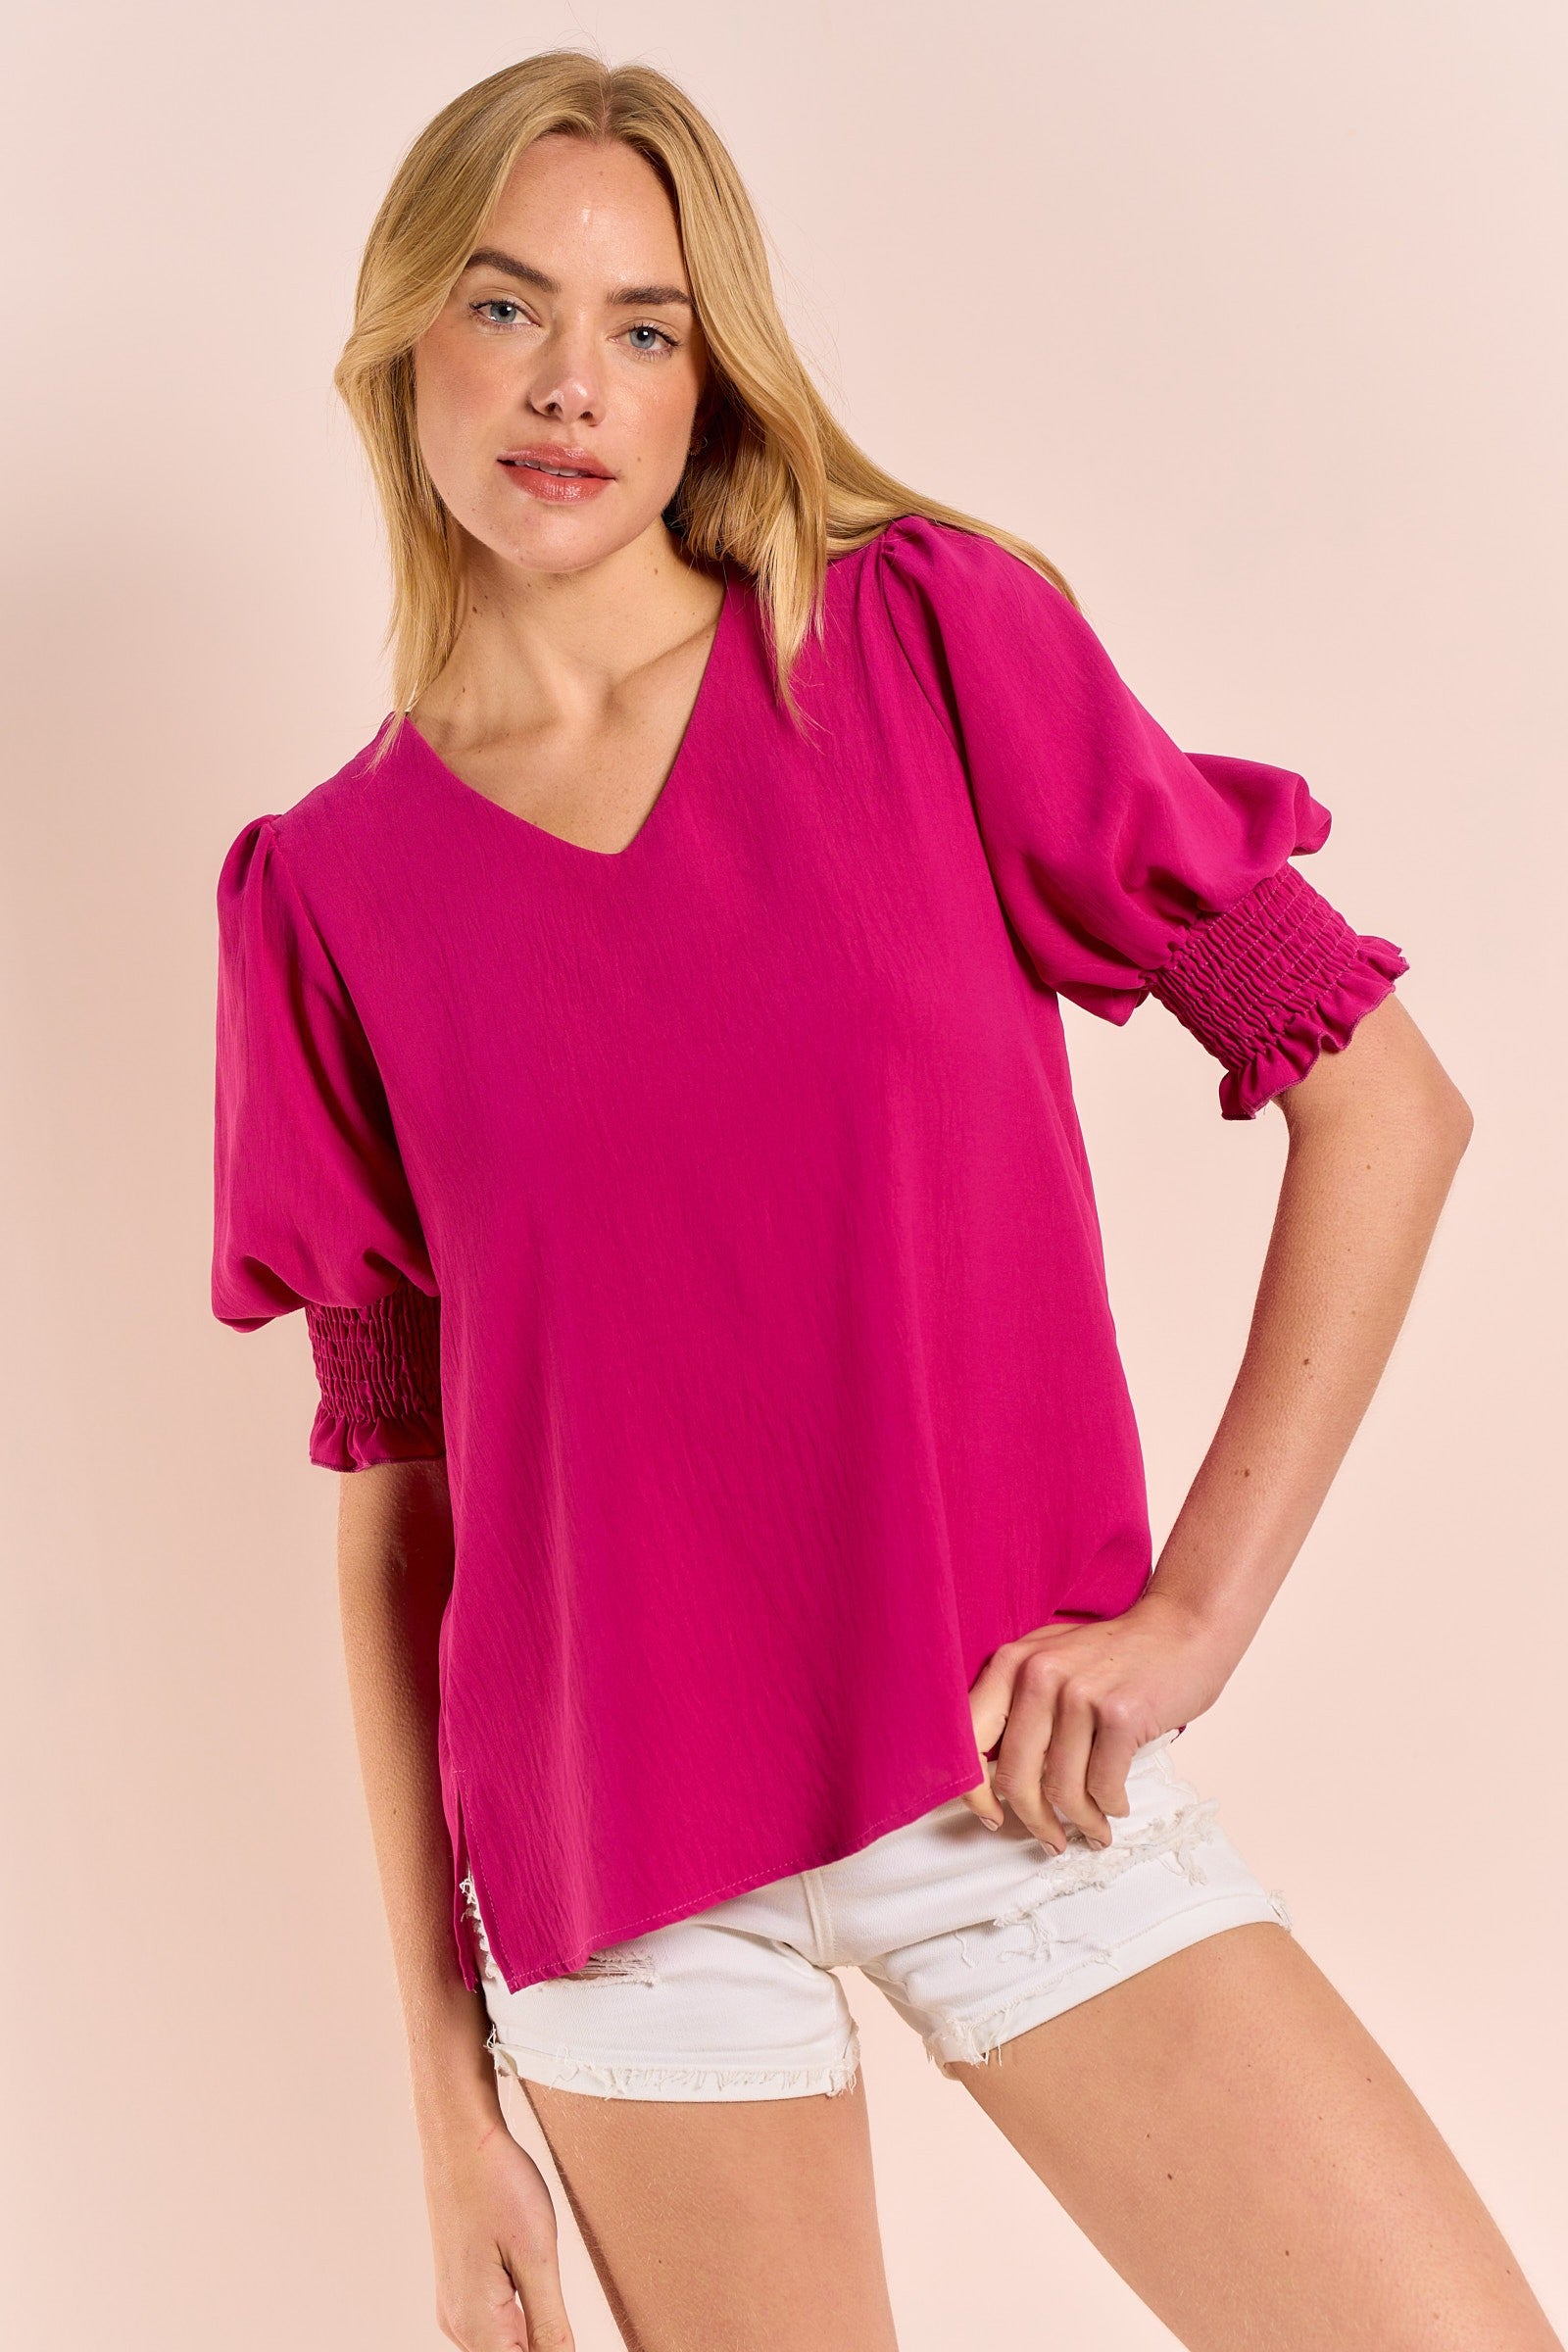 How Much I Need You Blouse - Magenta